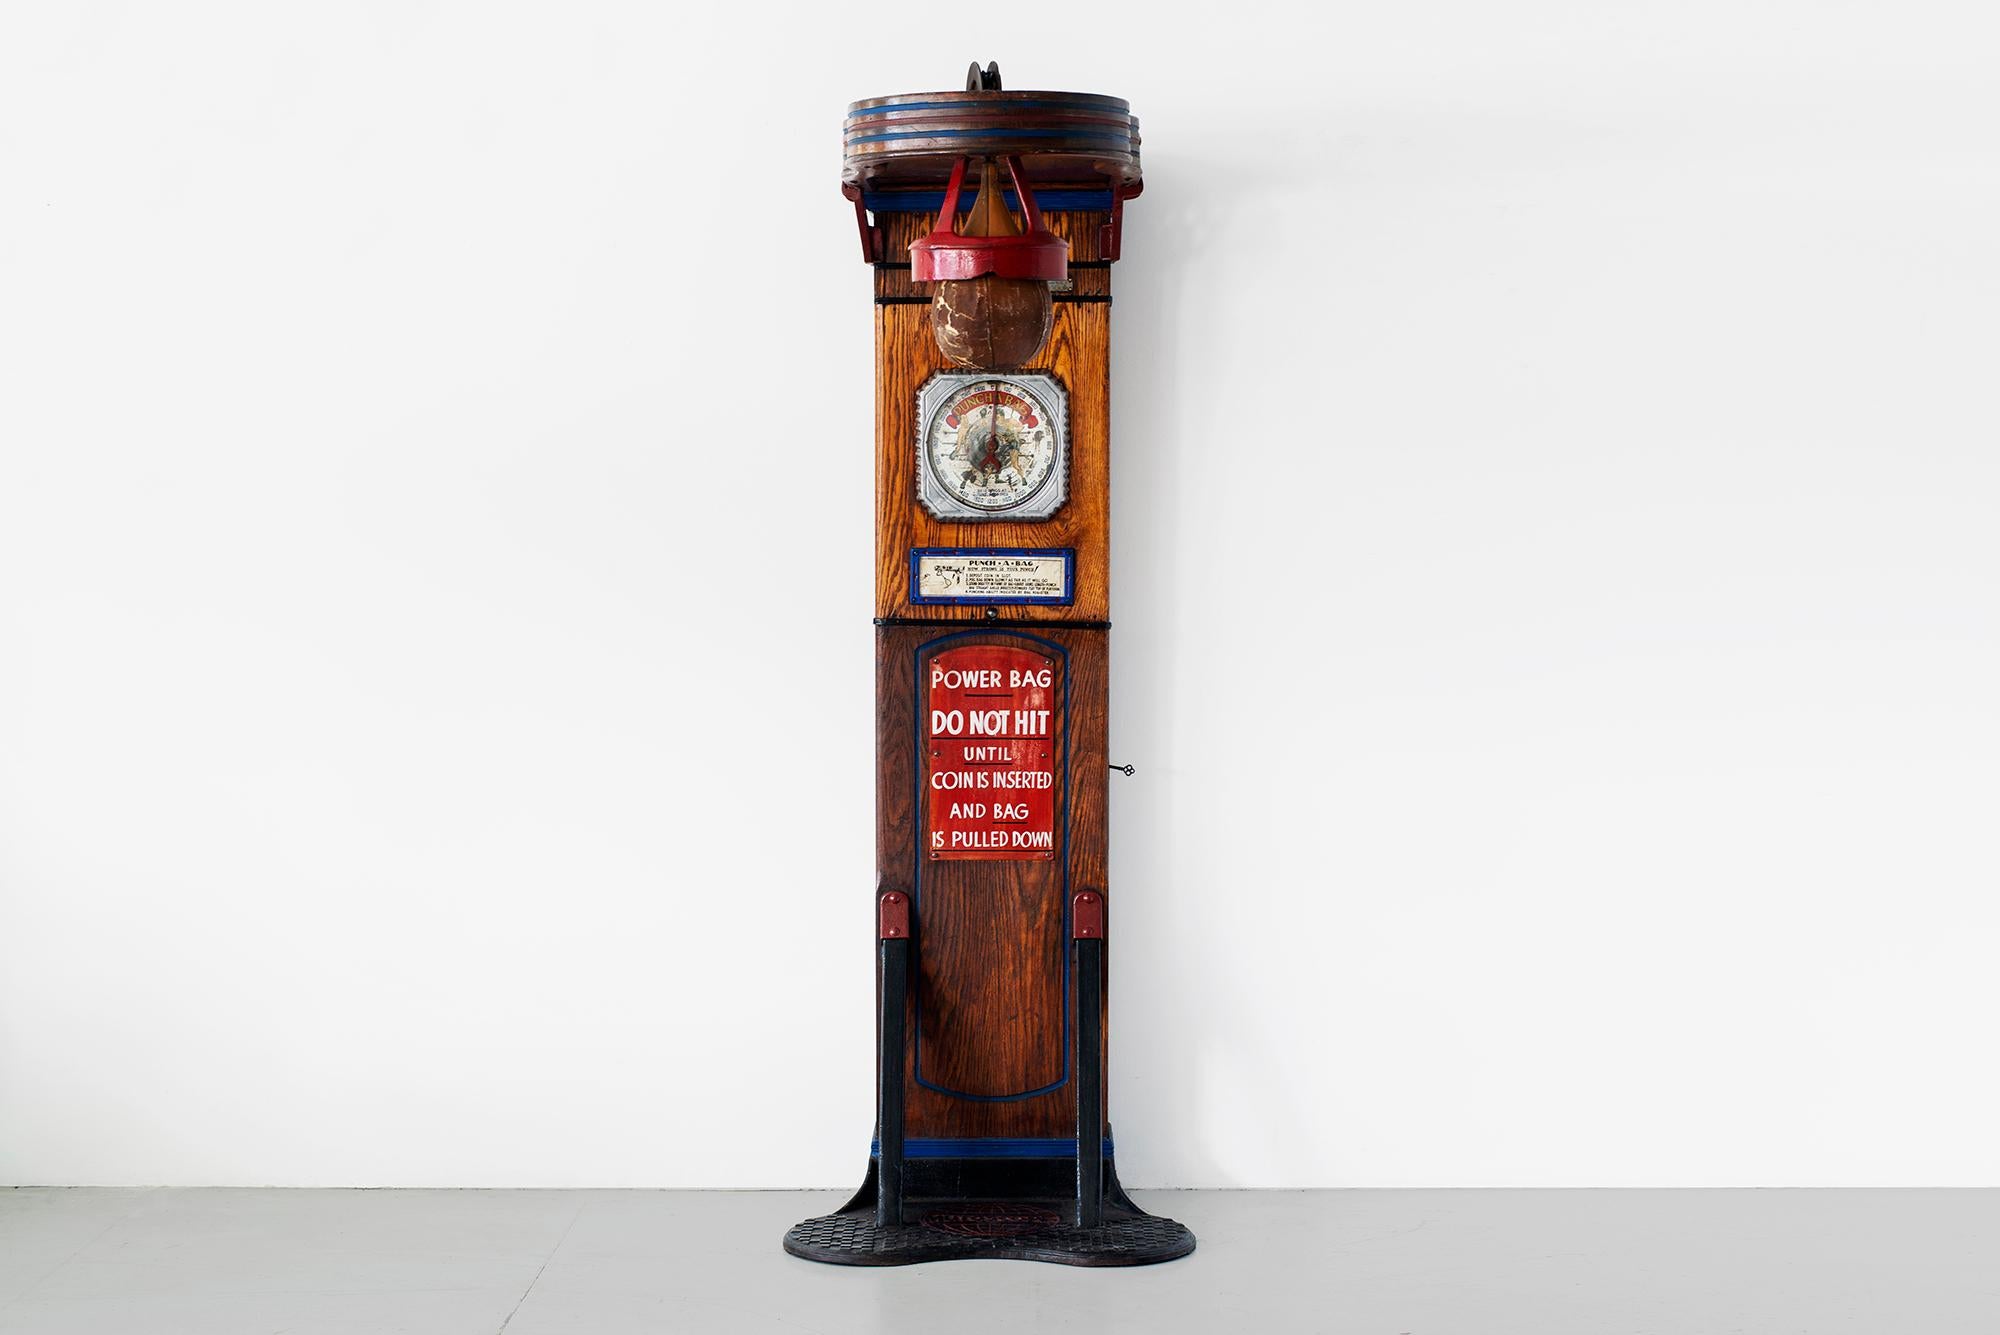 This rare 1920s coin-op punching game, manufactured by Mutoscope is designed to measure the strength of one's punch. Fully restored and in working condition - the game features a leather punching bag suspended from an upper platform. Wonderful